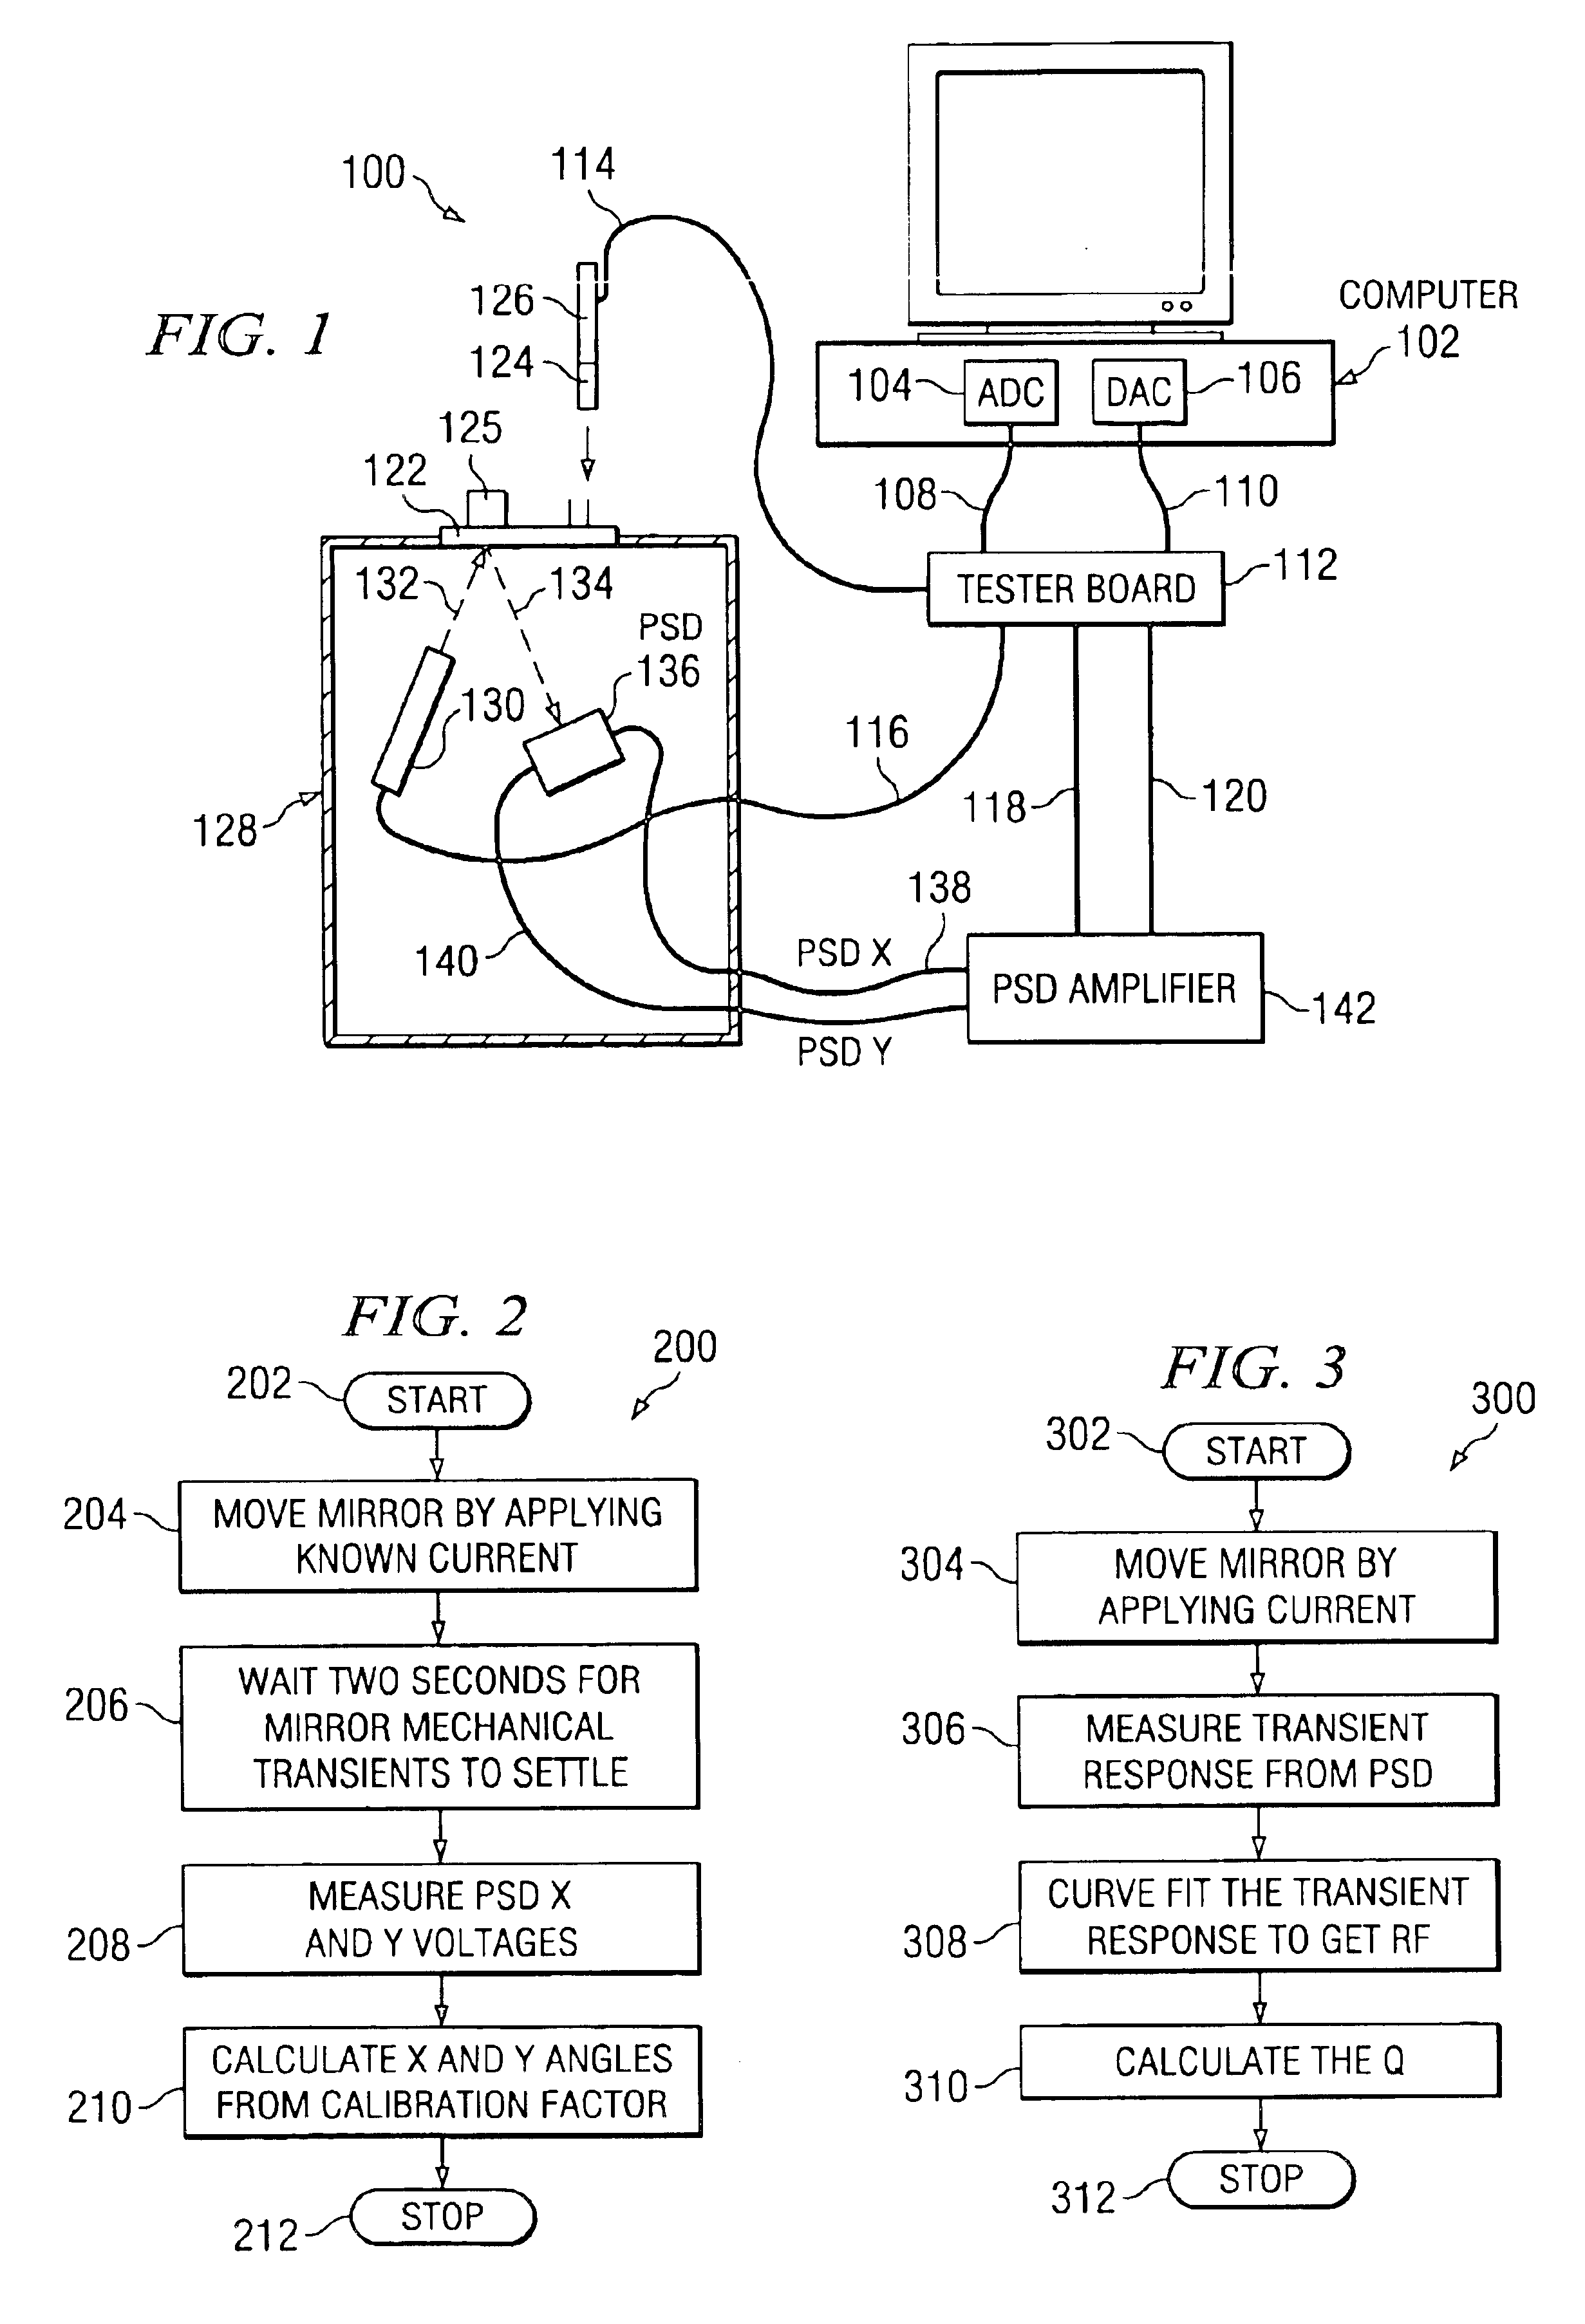 Automatic test system for an analog micromirror device